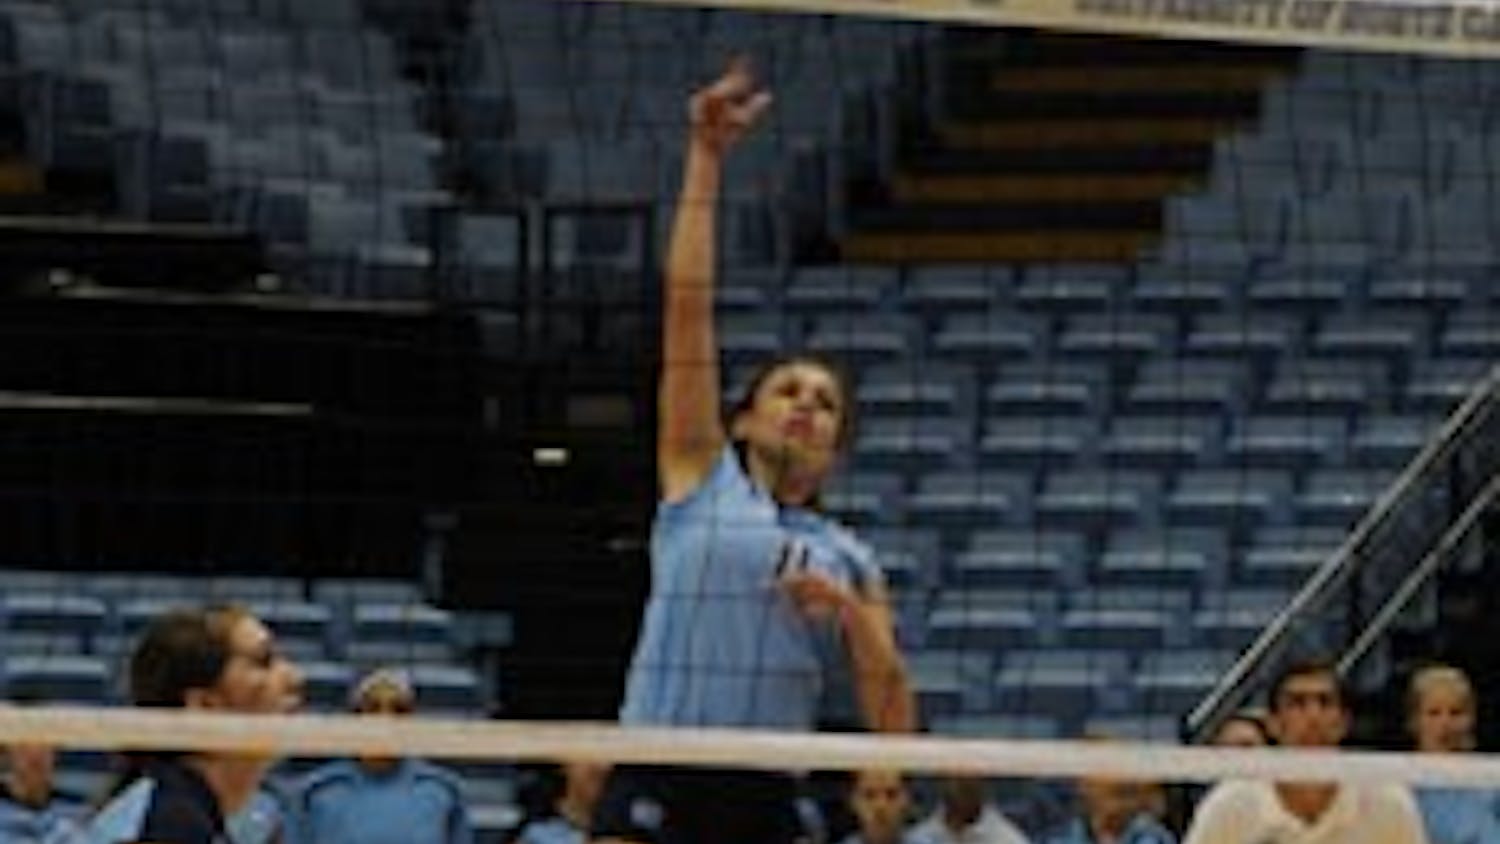 North Carolina’s women’s volleyball team dropped two straight matches to Marshall and Colorado State.